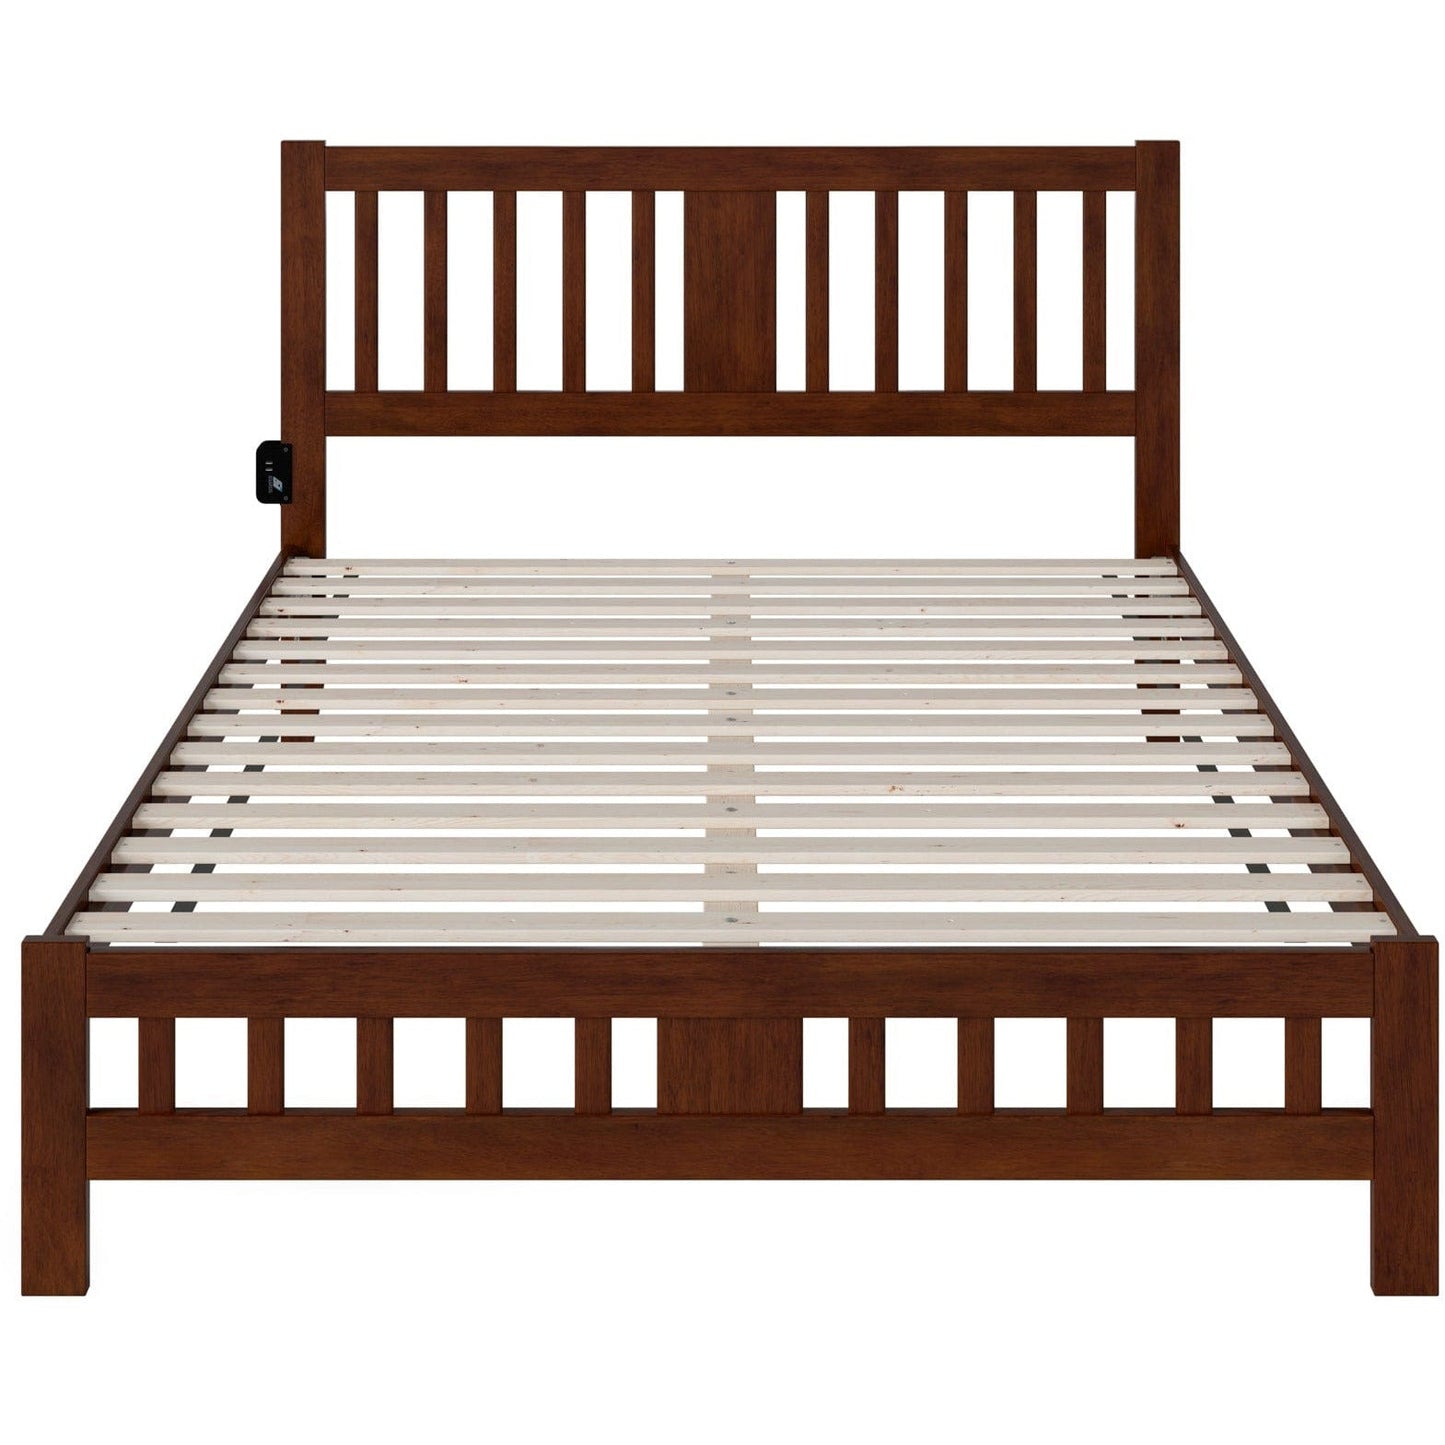 AFI Furnishings Tahoe Queen Bed with Footboard in Walnut AG8960044